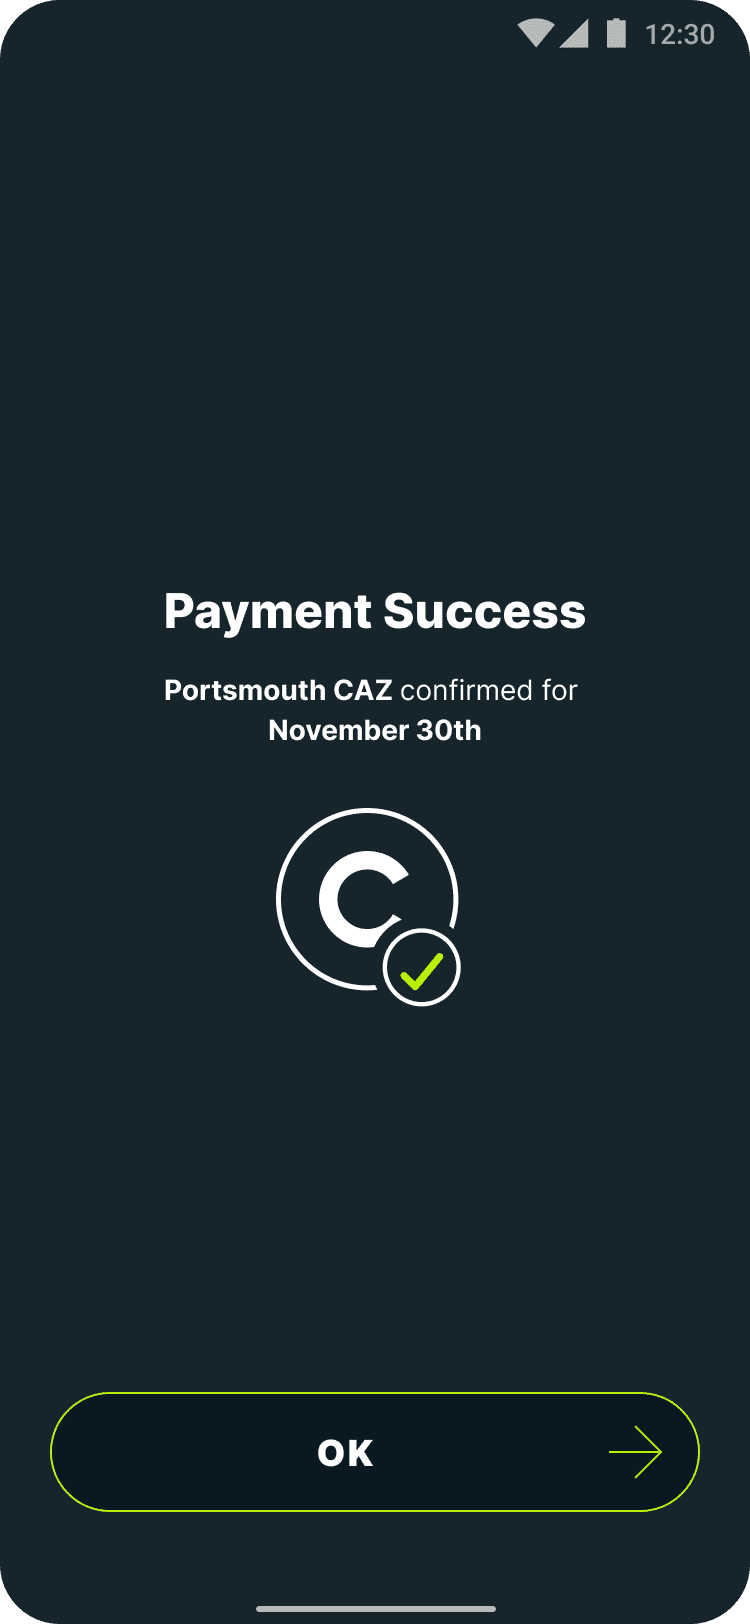 Payment success screen for the Portsmouth Clean Air Zone charge